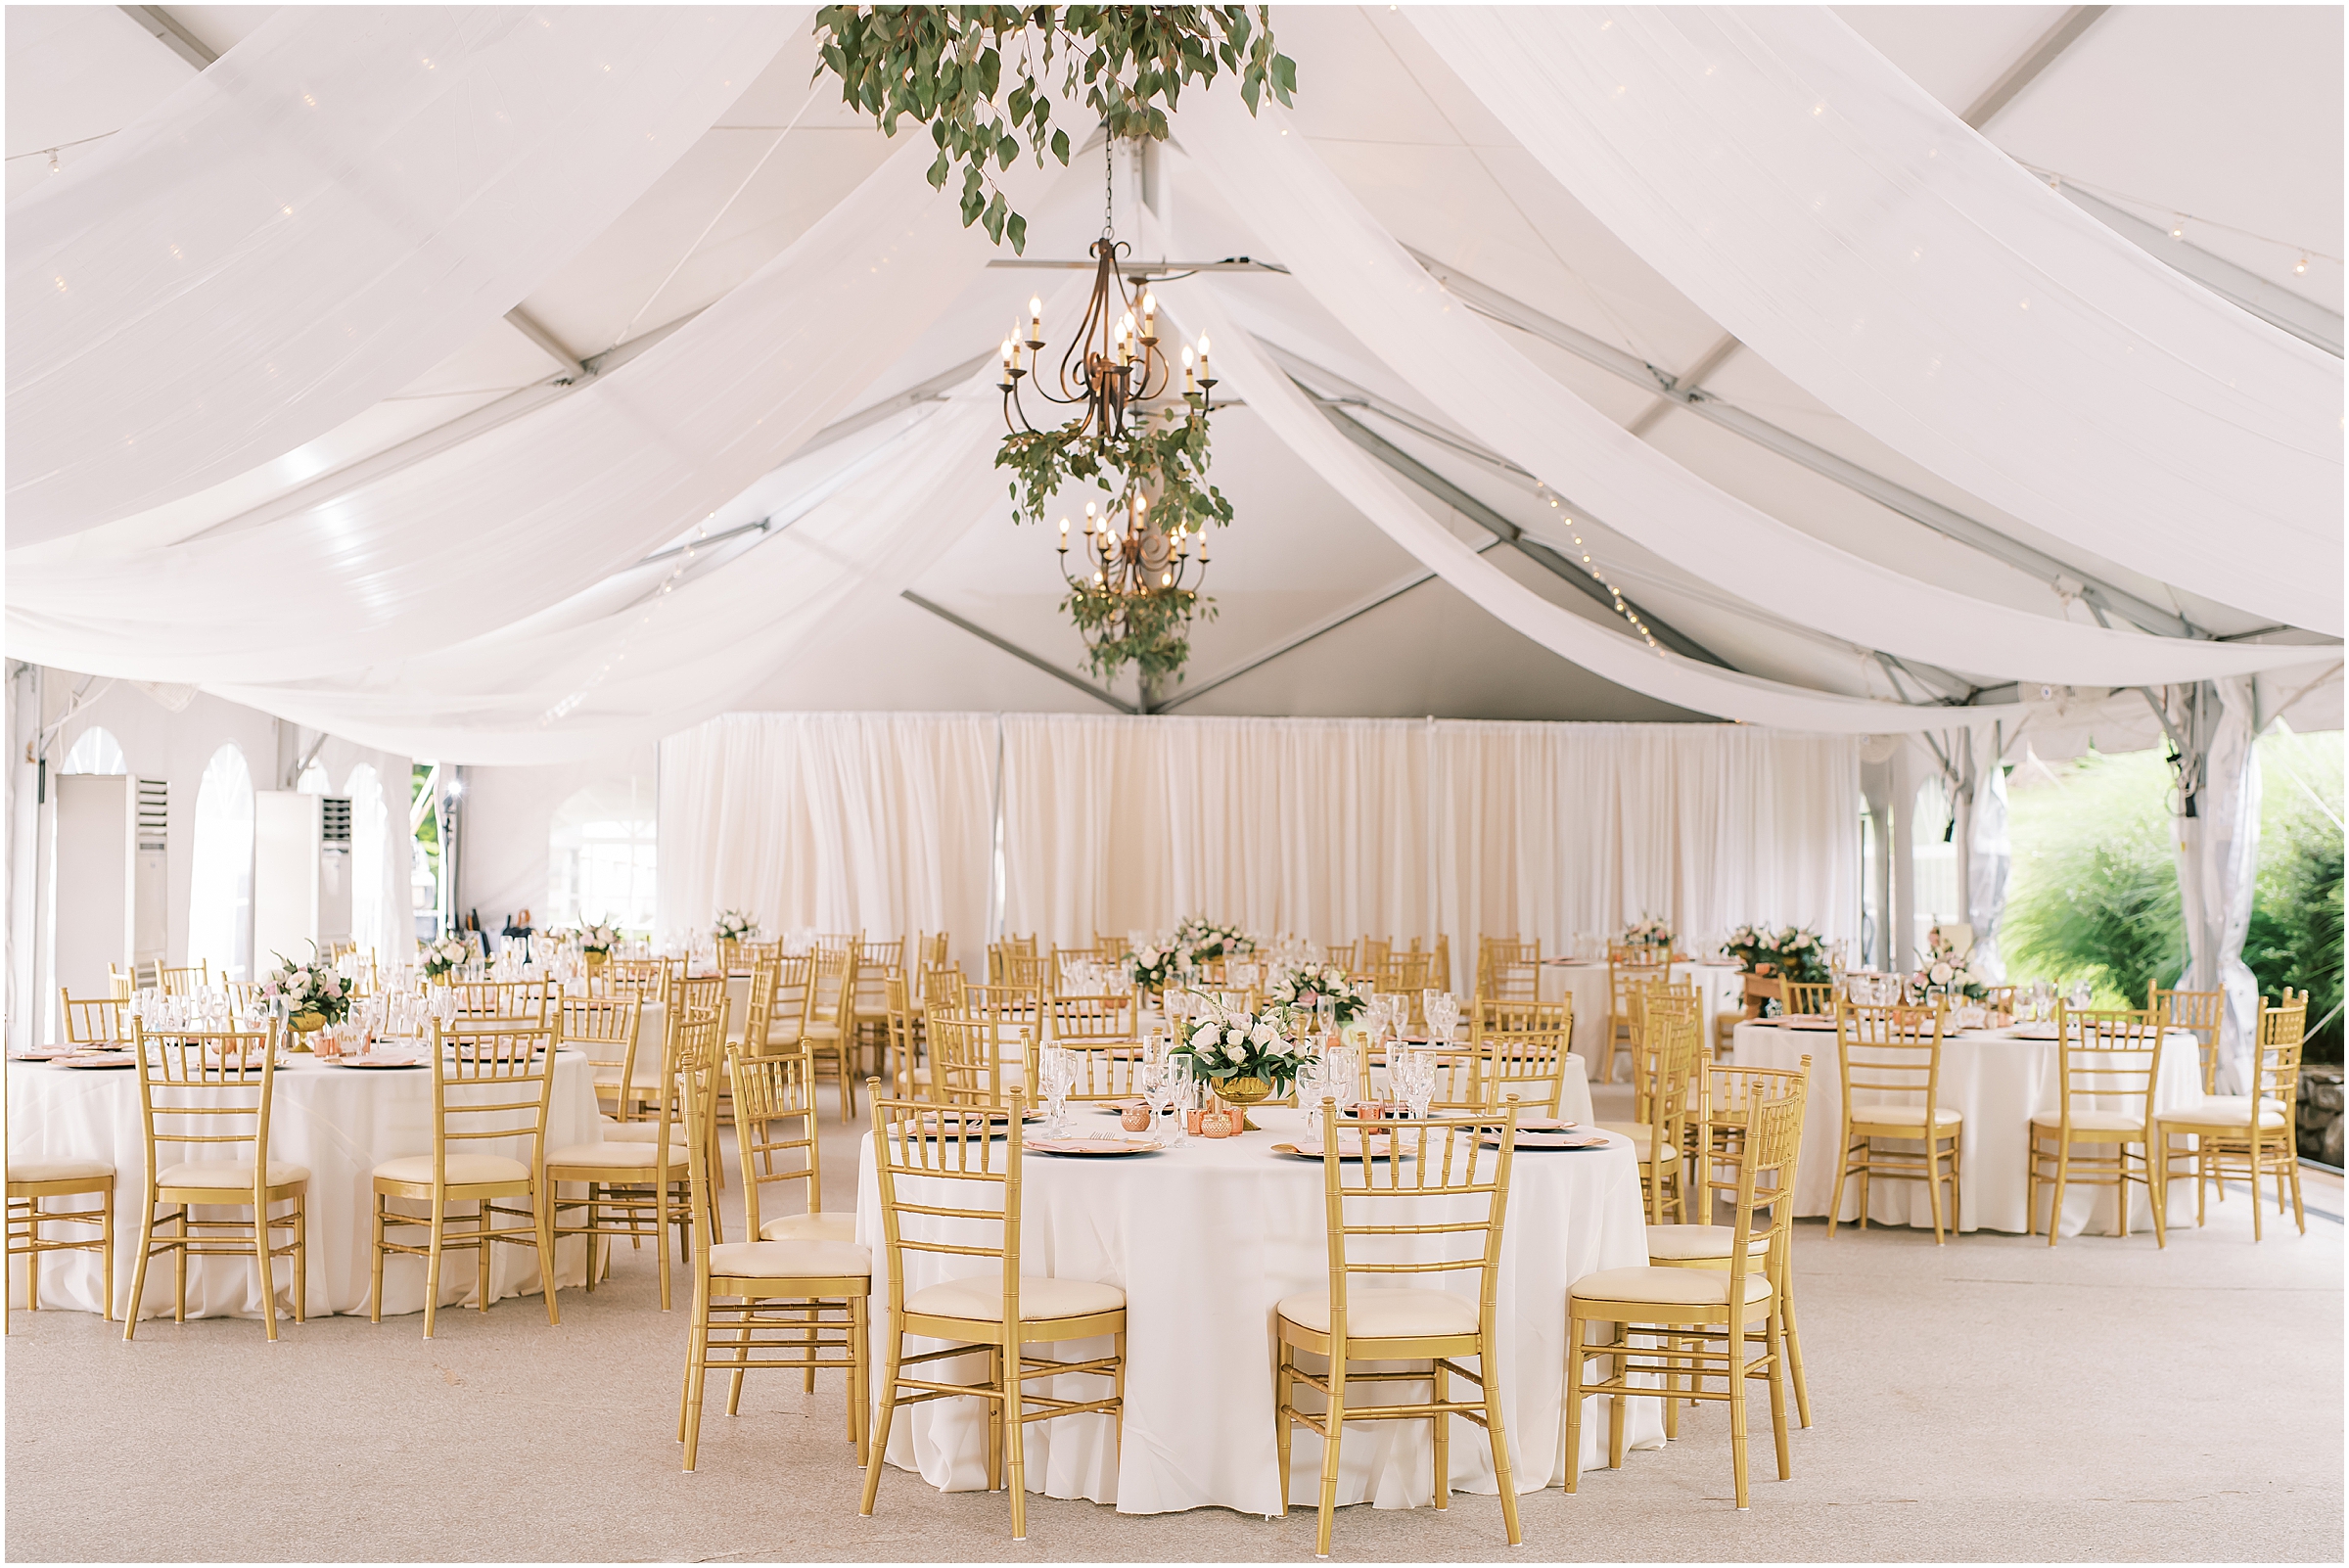 All white tented wedding reception at Rust Manor House